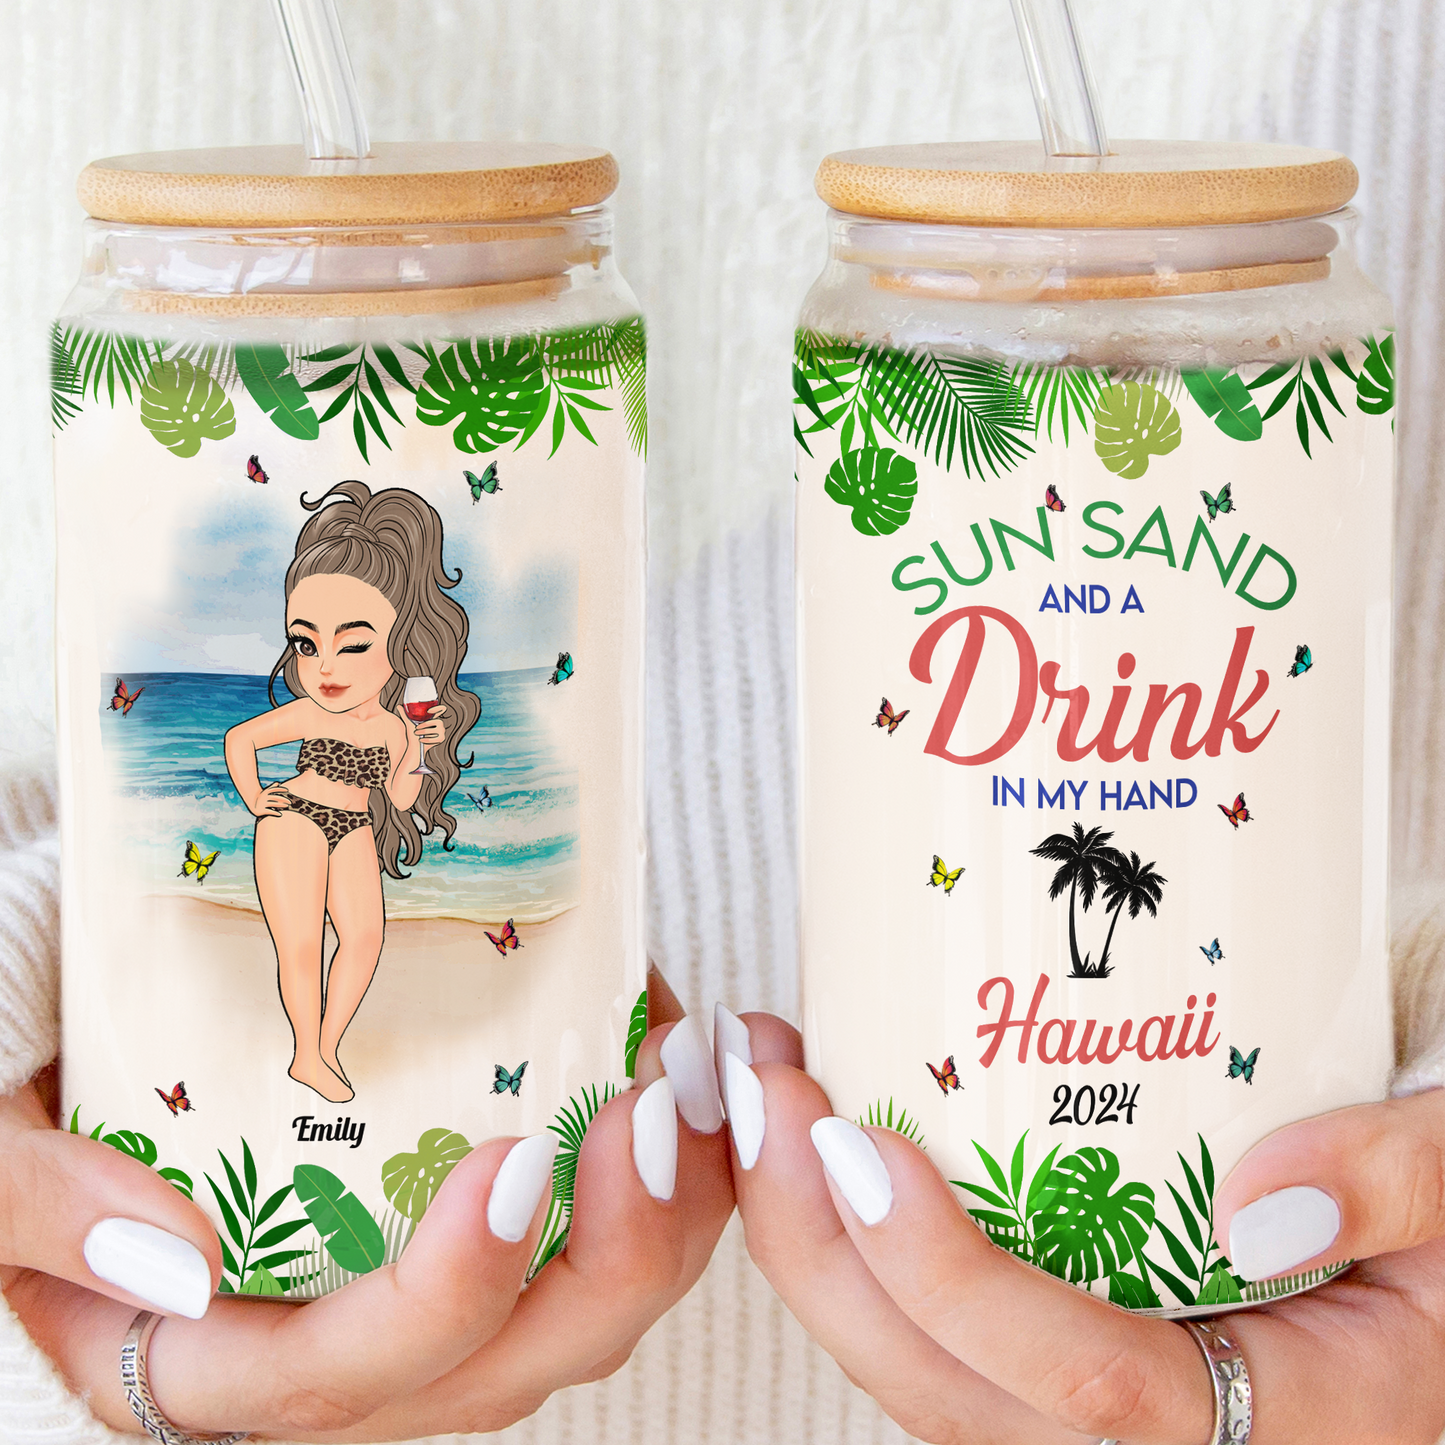 Sun Sand And A Drink In My Hand Summer Friend Trip - Personalized Clear Glass Cup